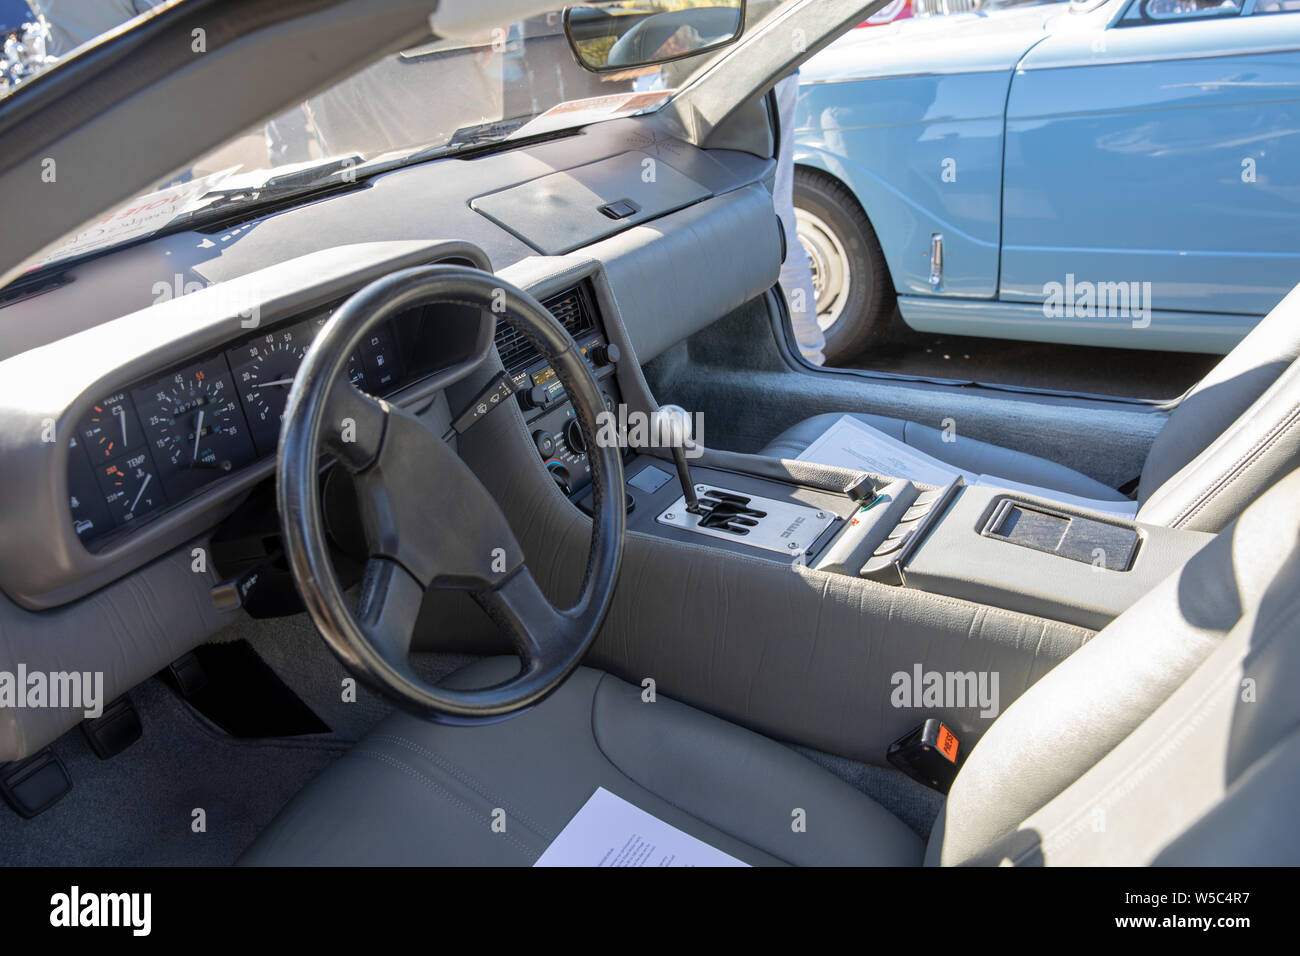 DMC DeLorean motor car and interior shot of steering wheel and dashboard, car on display at a Sydney classic car show,Australia Stock Photo